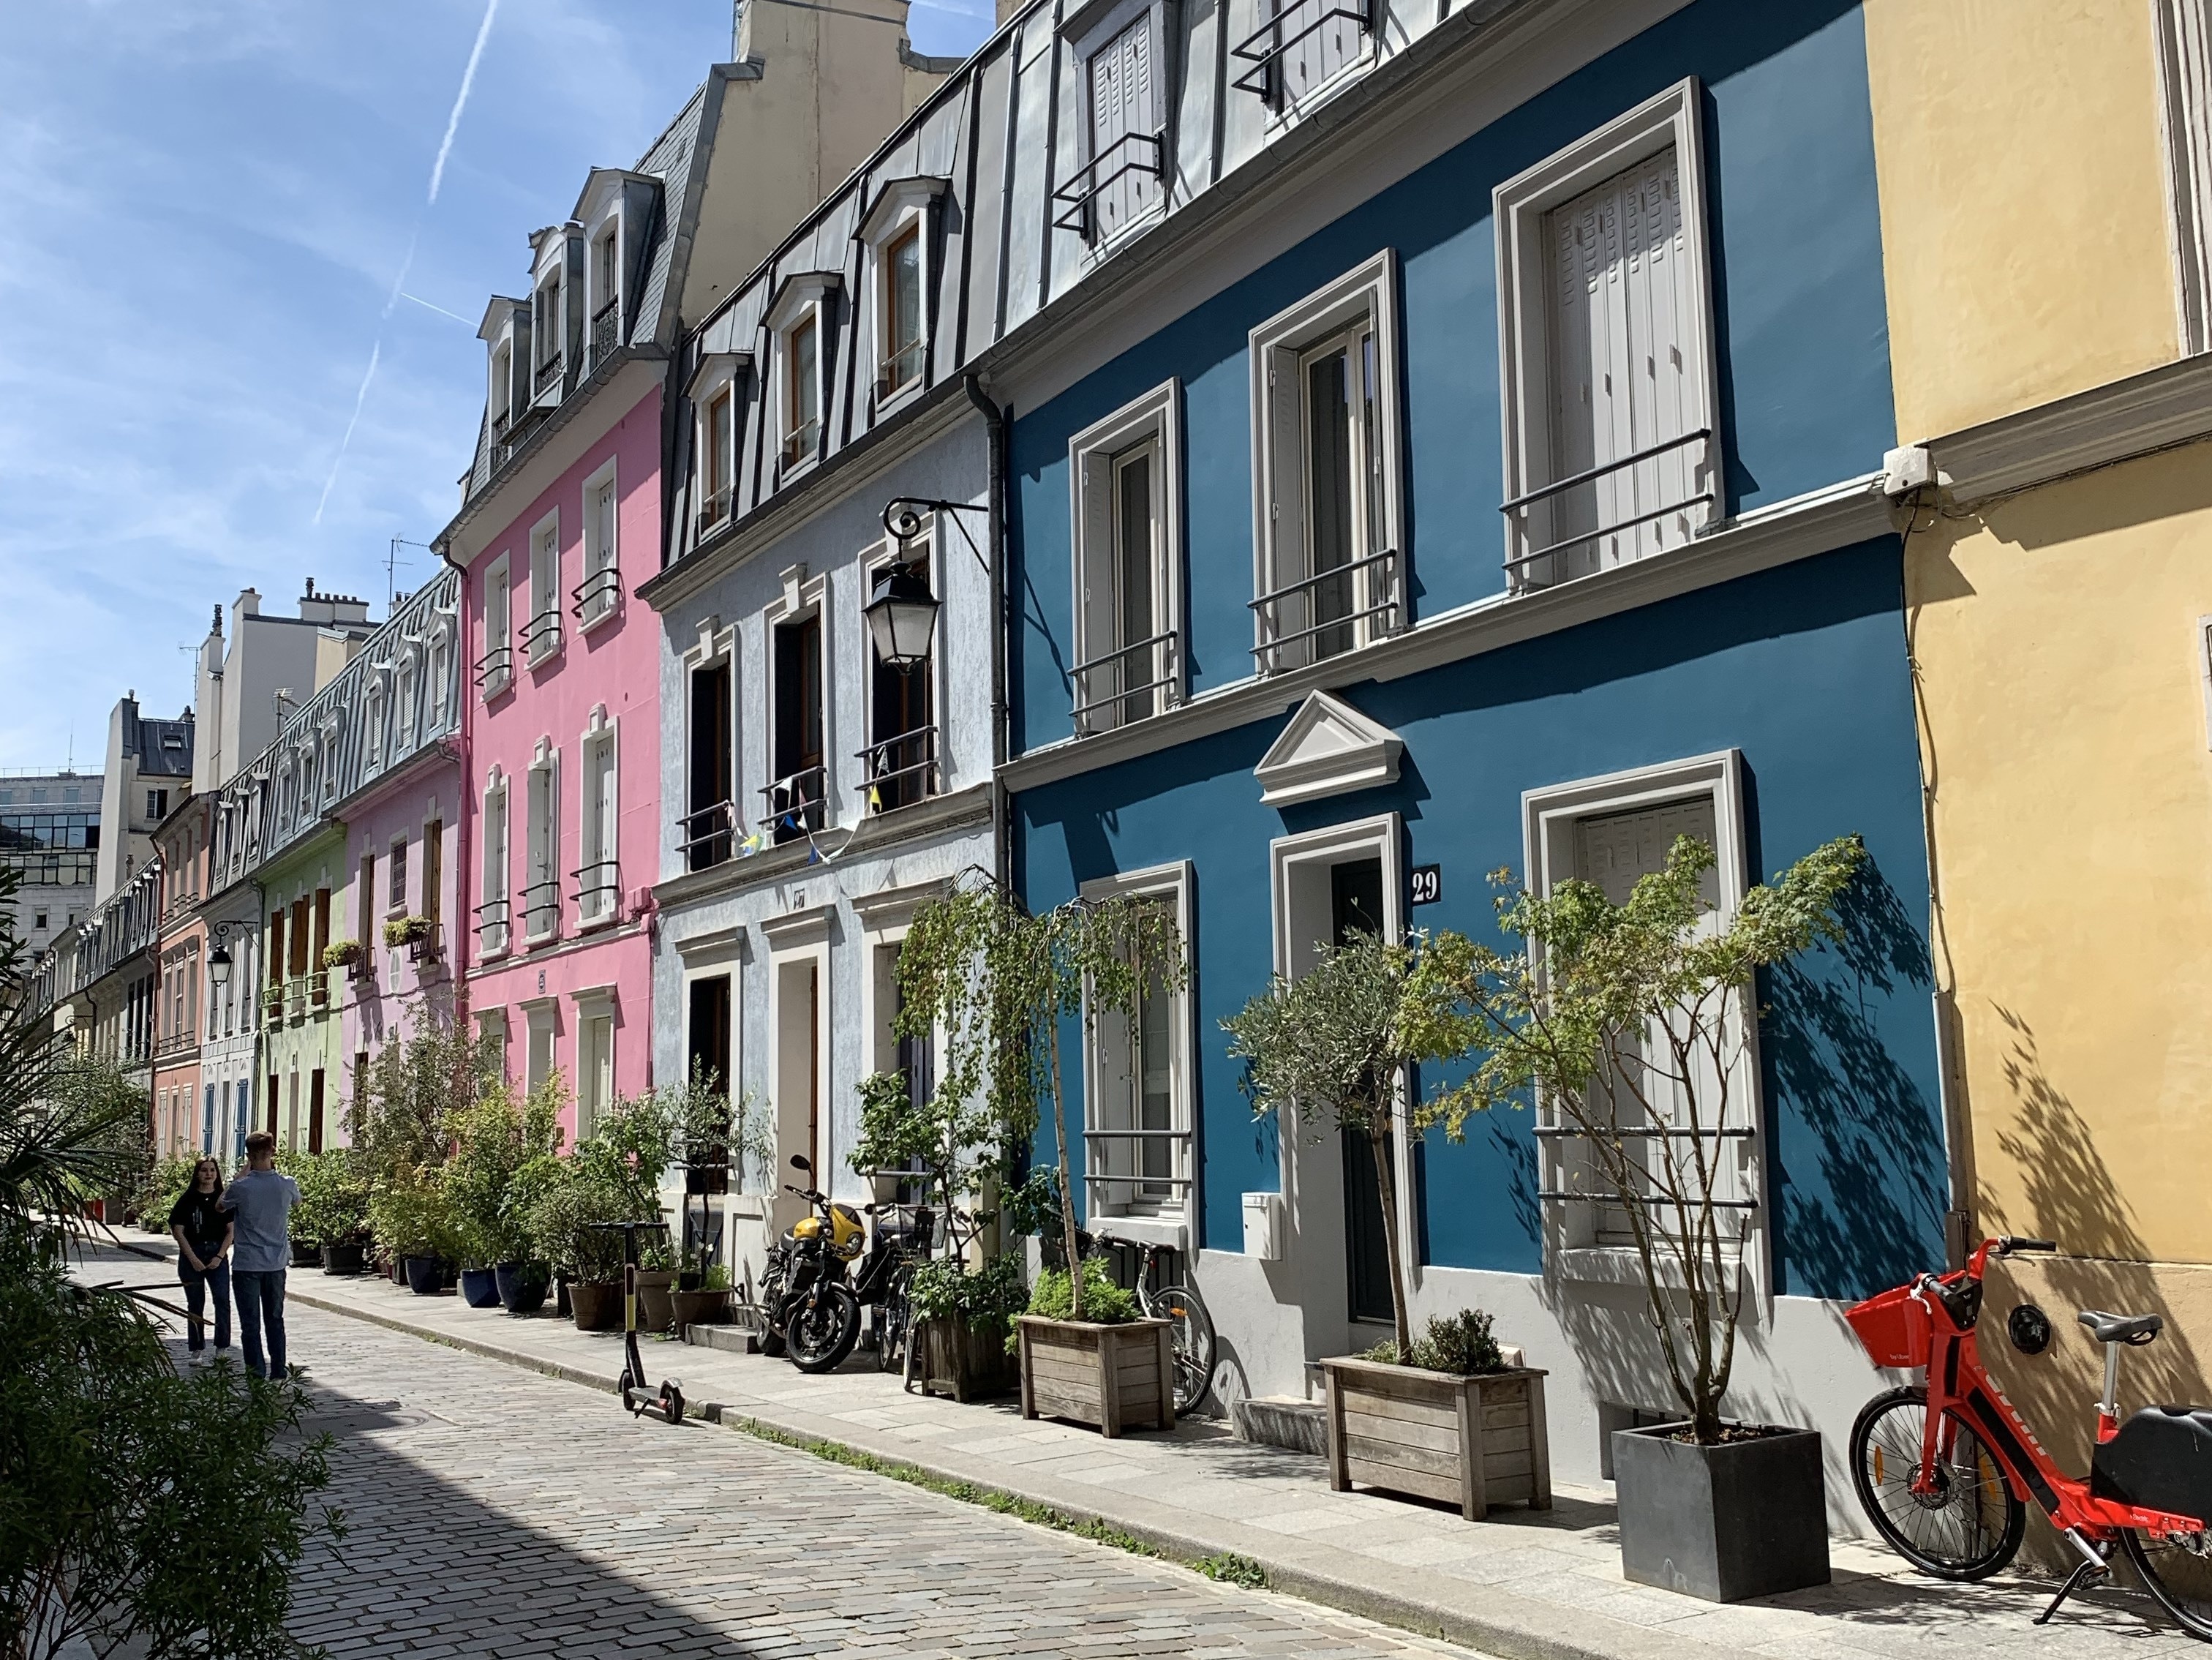 This is 30 Rue Crémieux. These are beautiful housing communities were New Orleans gained its inspiration from for there architecture!